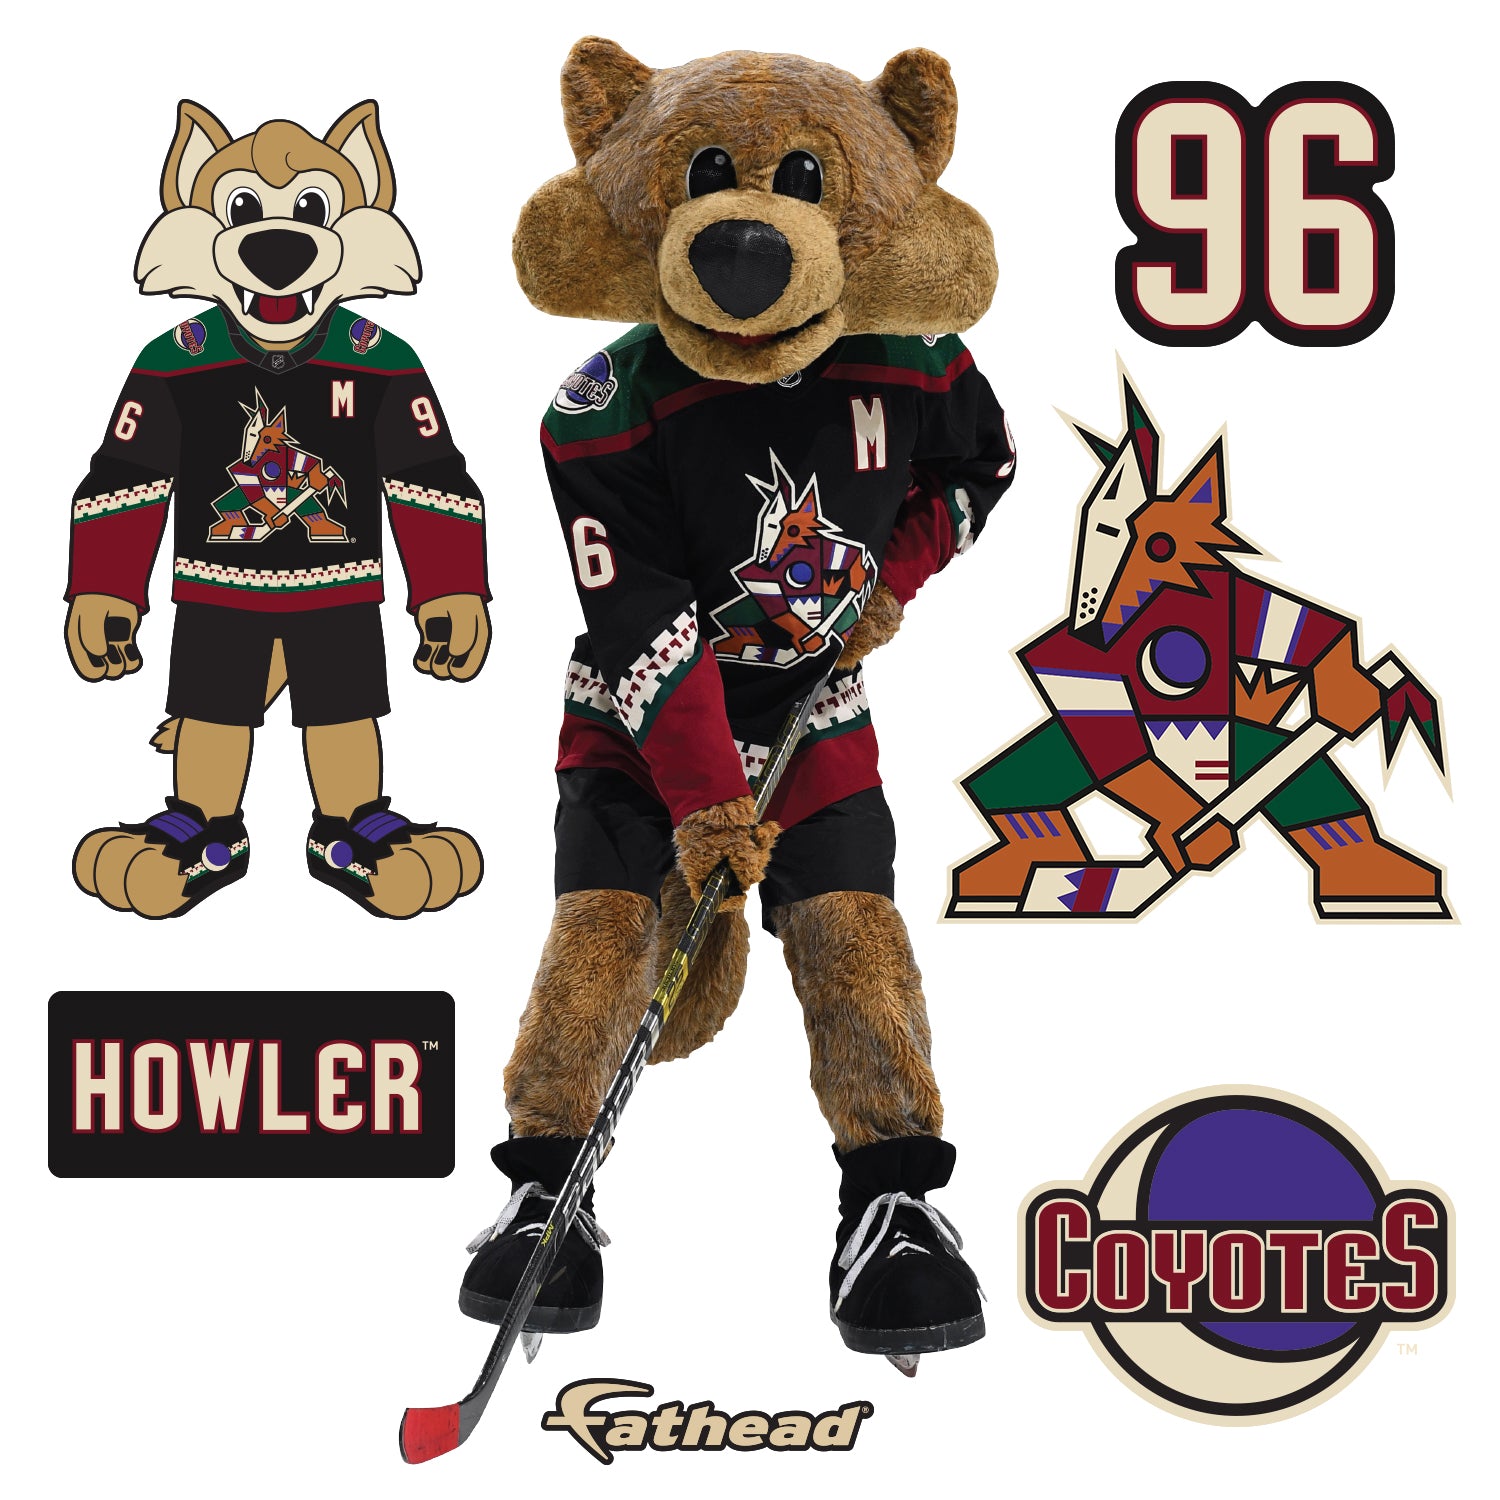 Life-Size Mascot +6 Decals  (35"W x 80"H) 